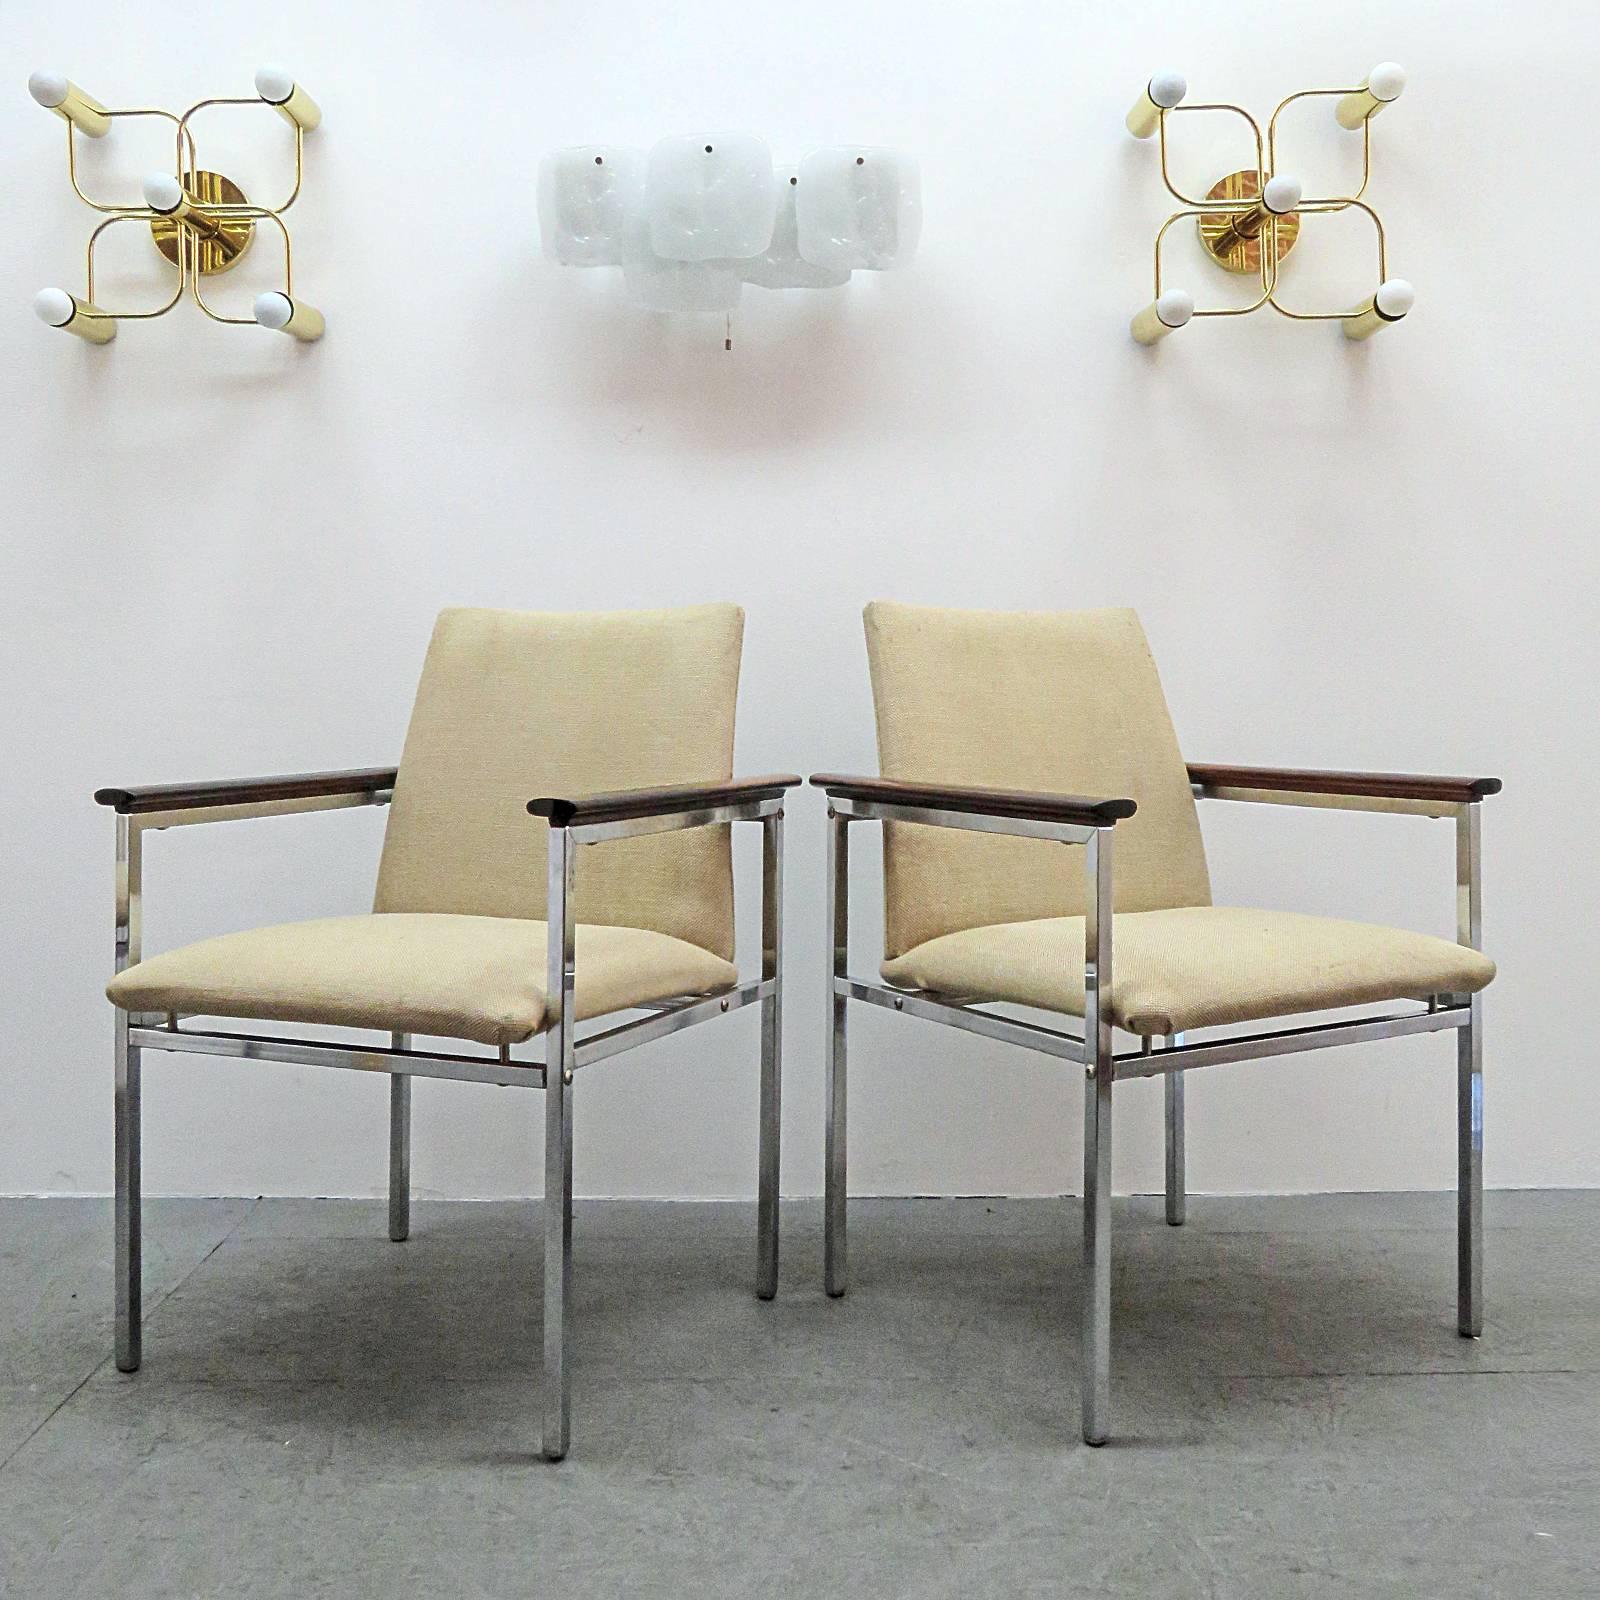 Wonderful set of four armchairs by Kai Kristiansen for Nipu Abyhoj, light beige wool upholstery on chrome-plated metal frames with palisander/rosewood armrests.